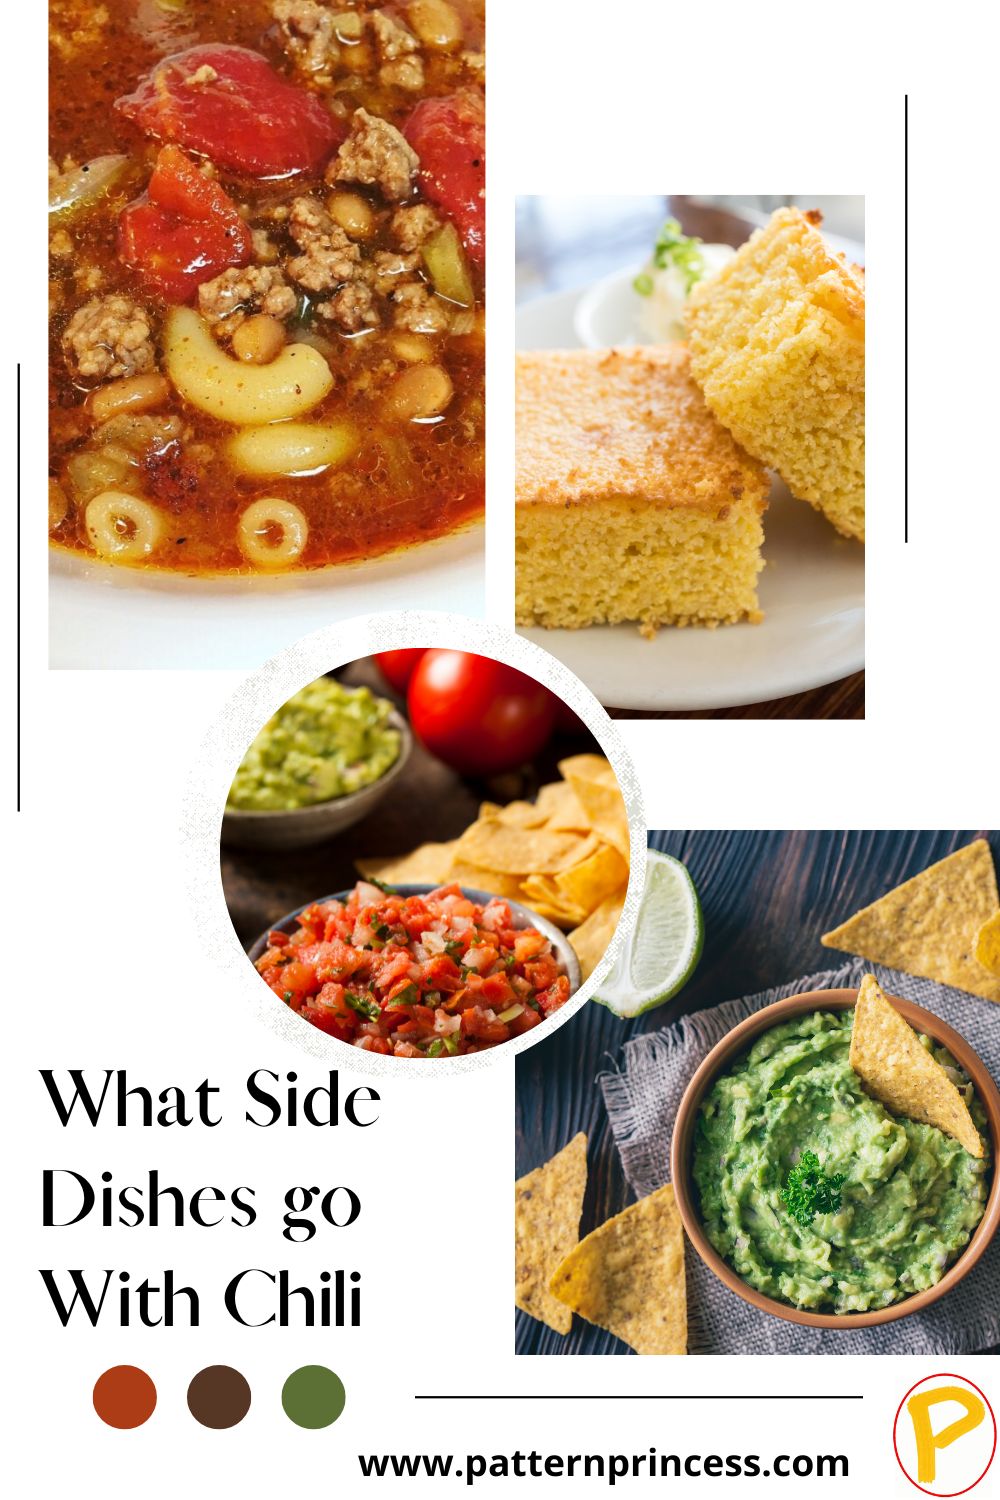 What Side Dishes go With Chili